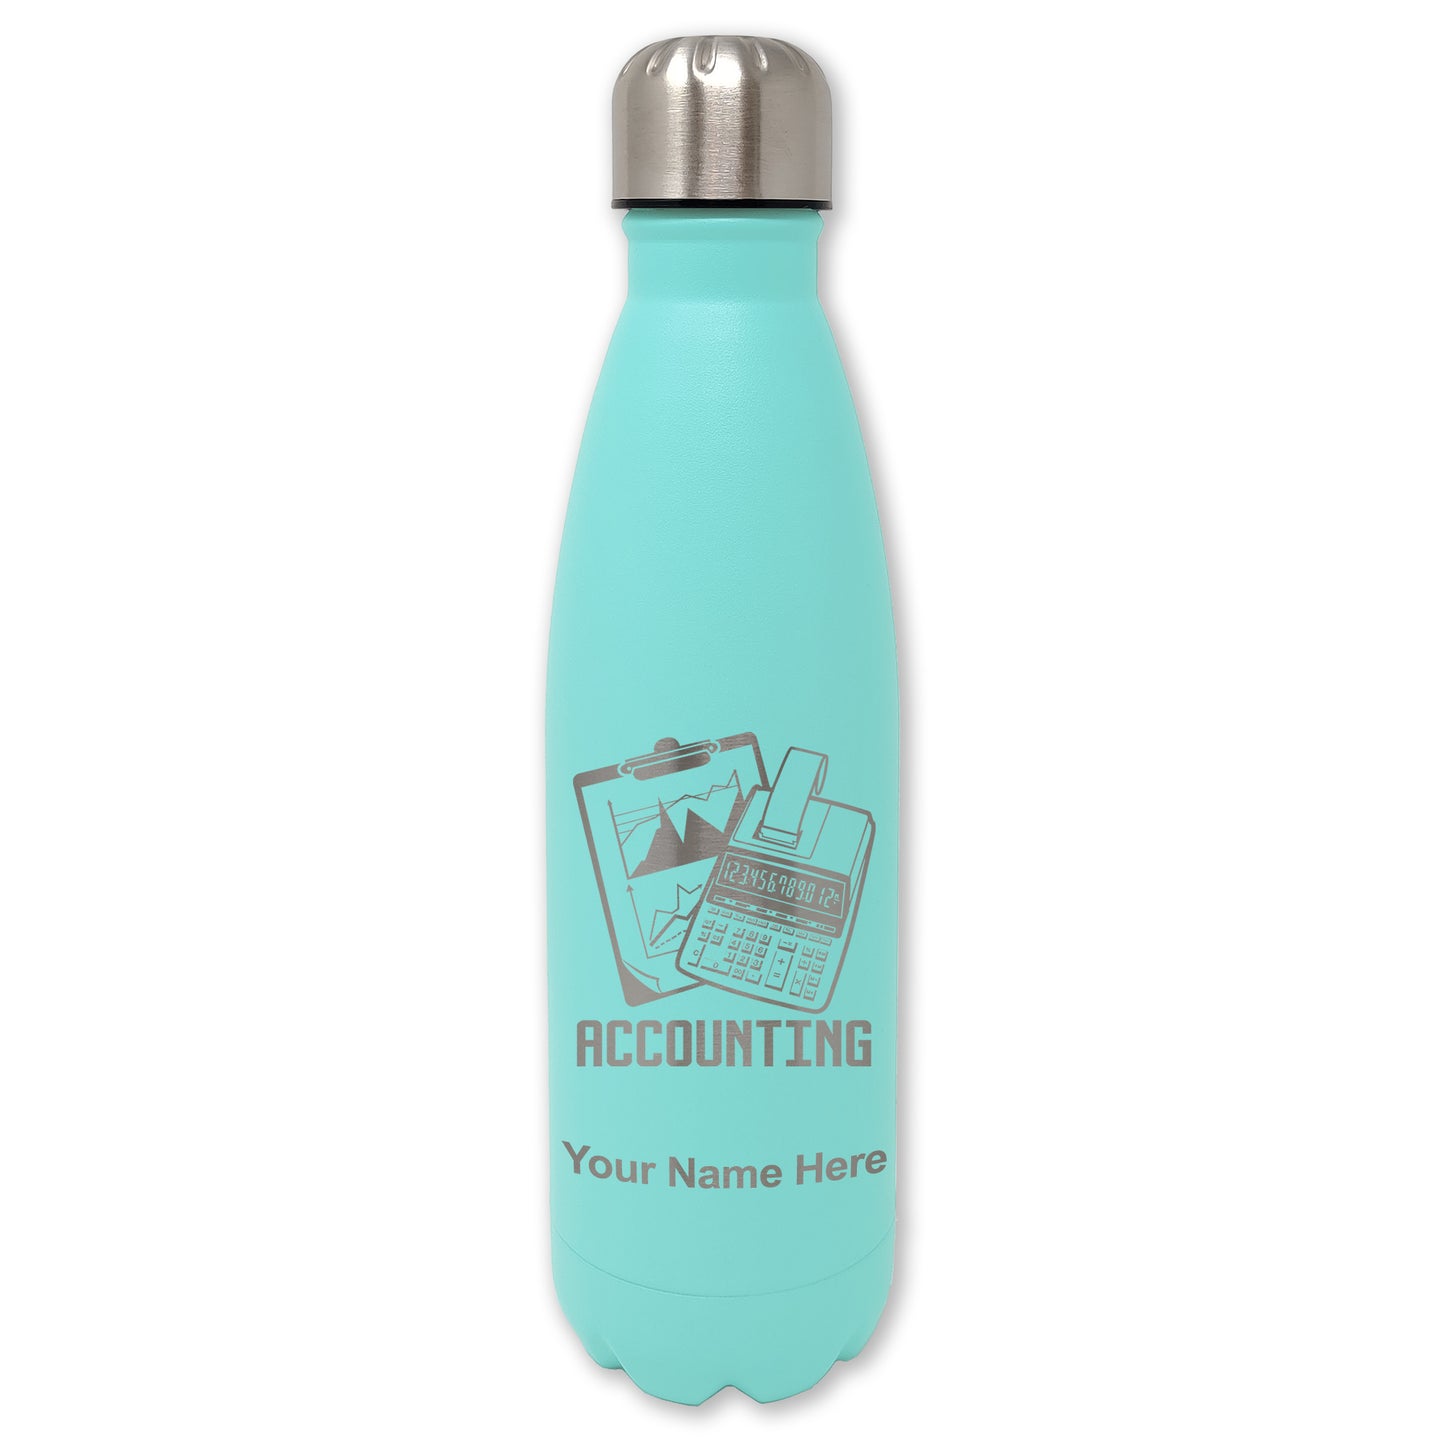 LaserGram Double Wall Water Bottle, Accounting, Personalized Engraving Included